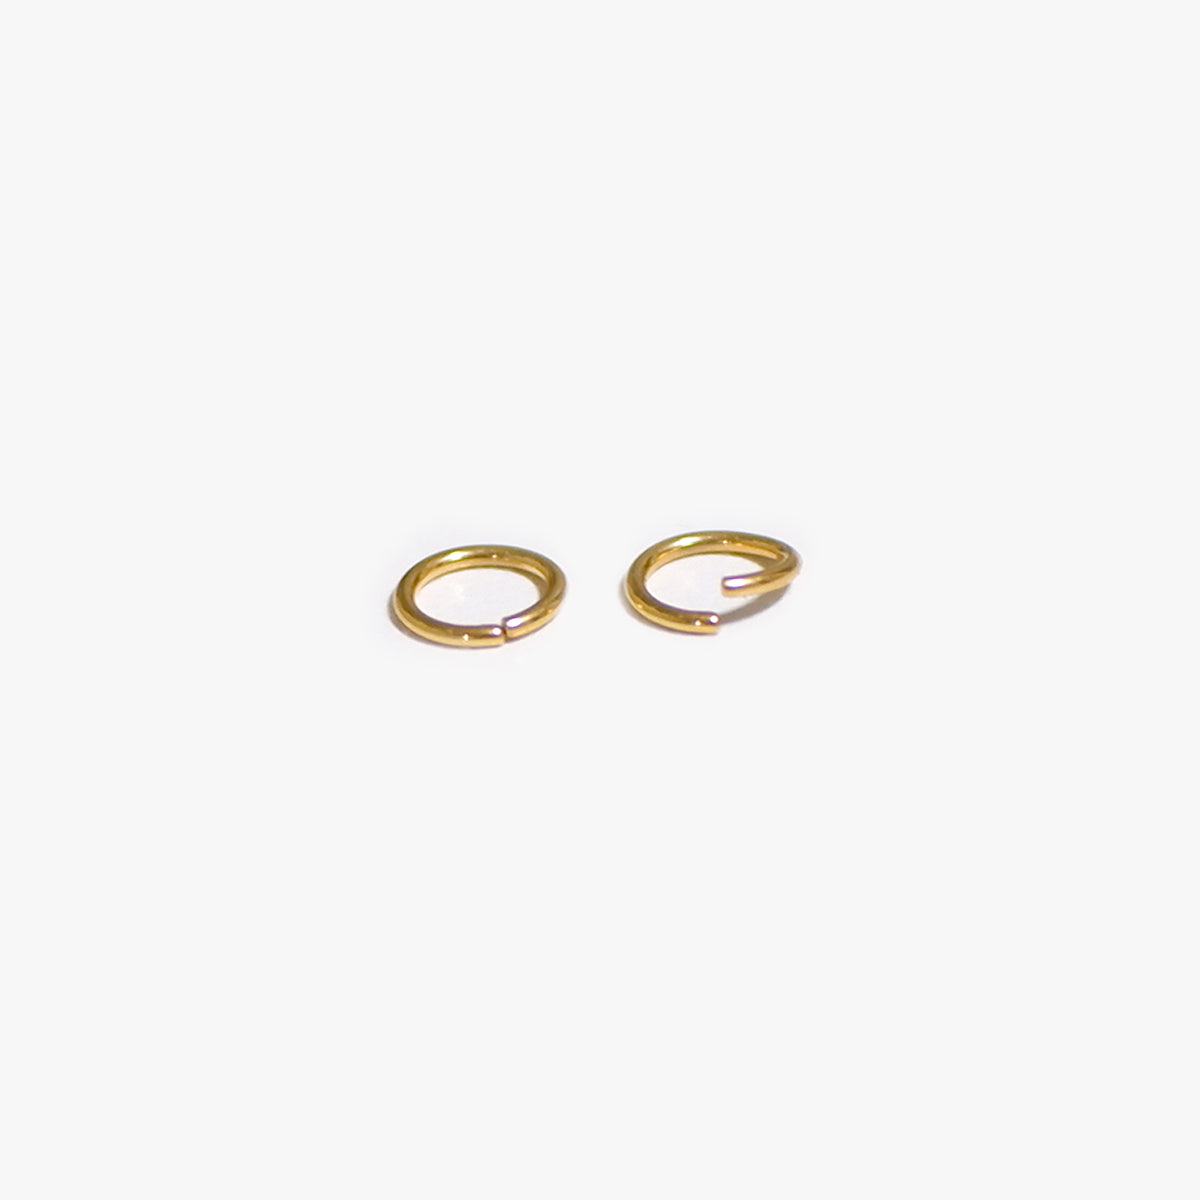 The Essential Seamless Earrings in Solid Gold